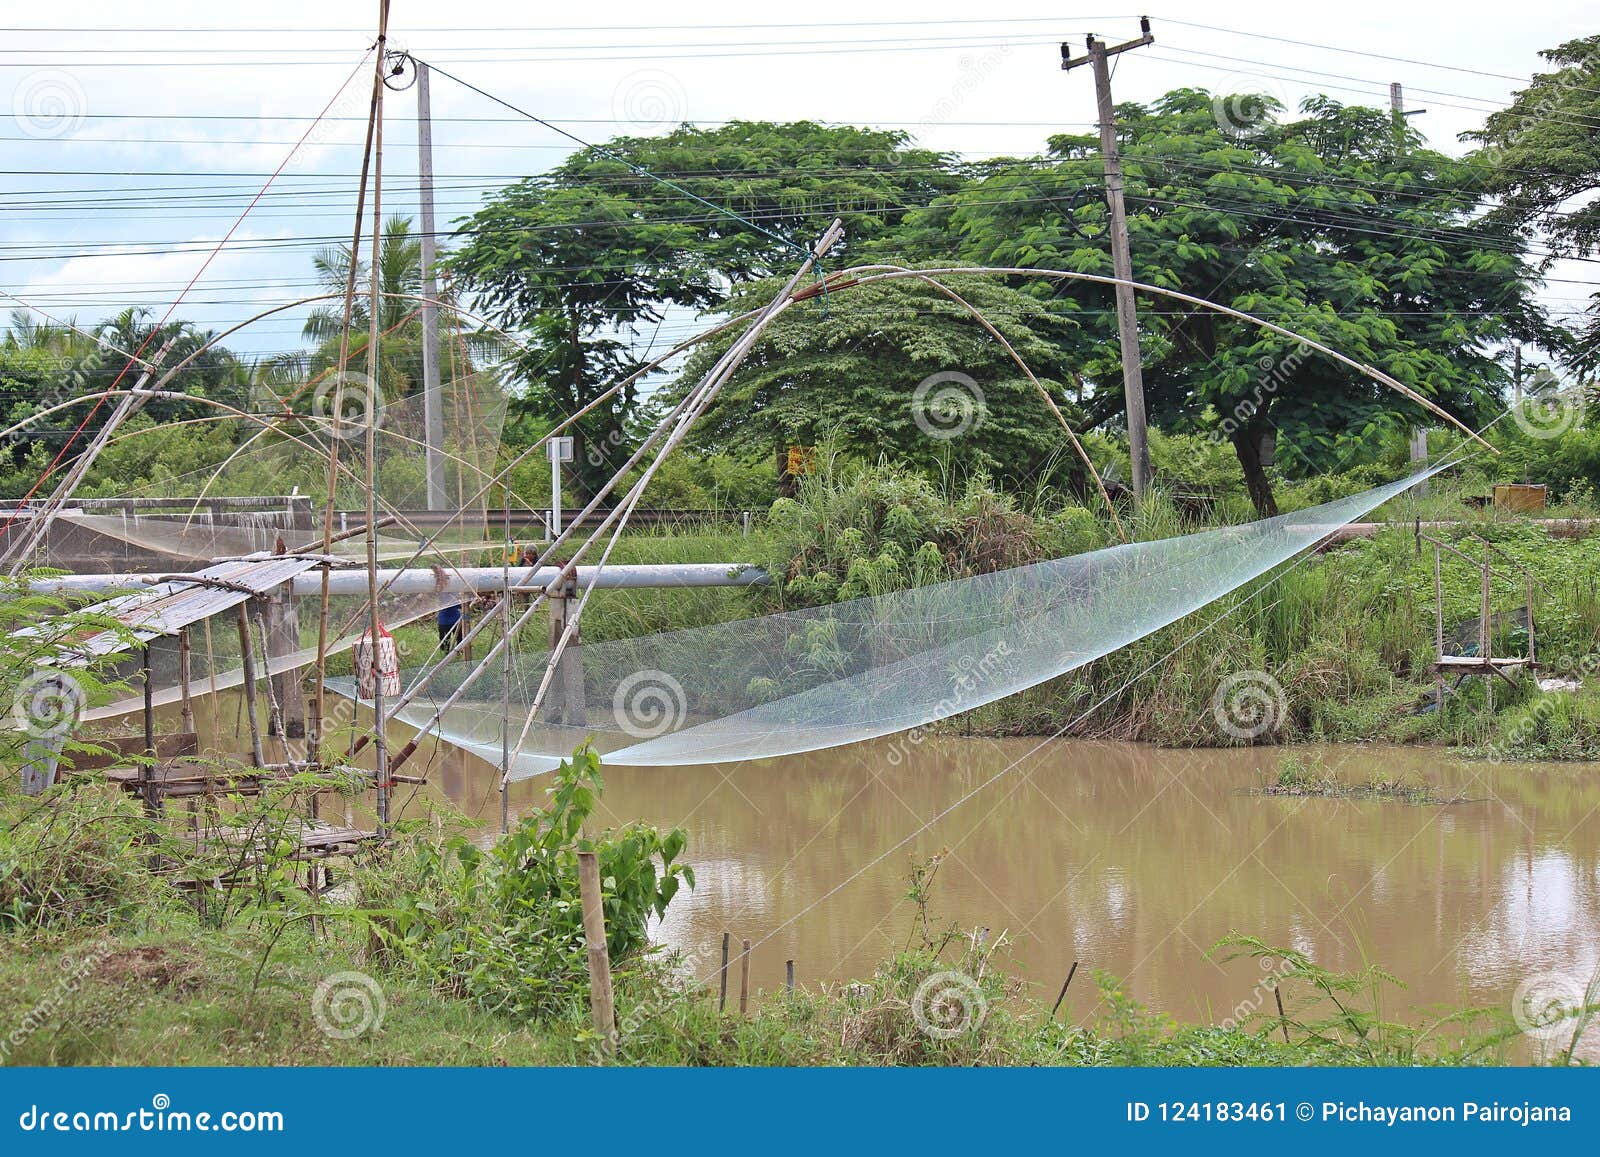 Dip net for fishing. editorial photo. Image of fishing - 124183461